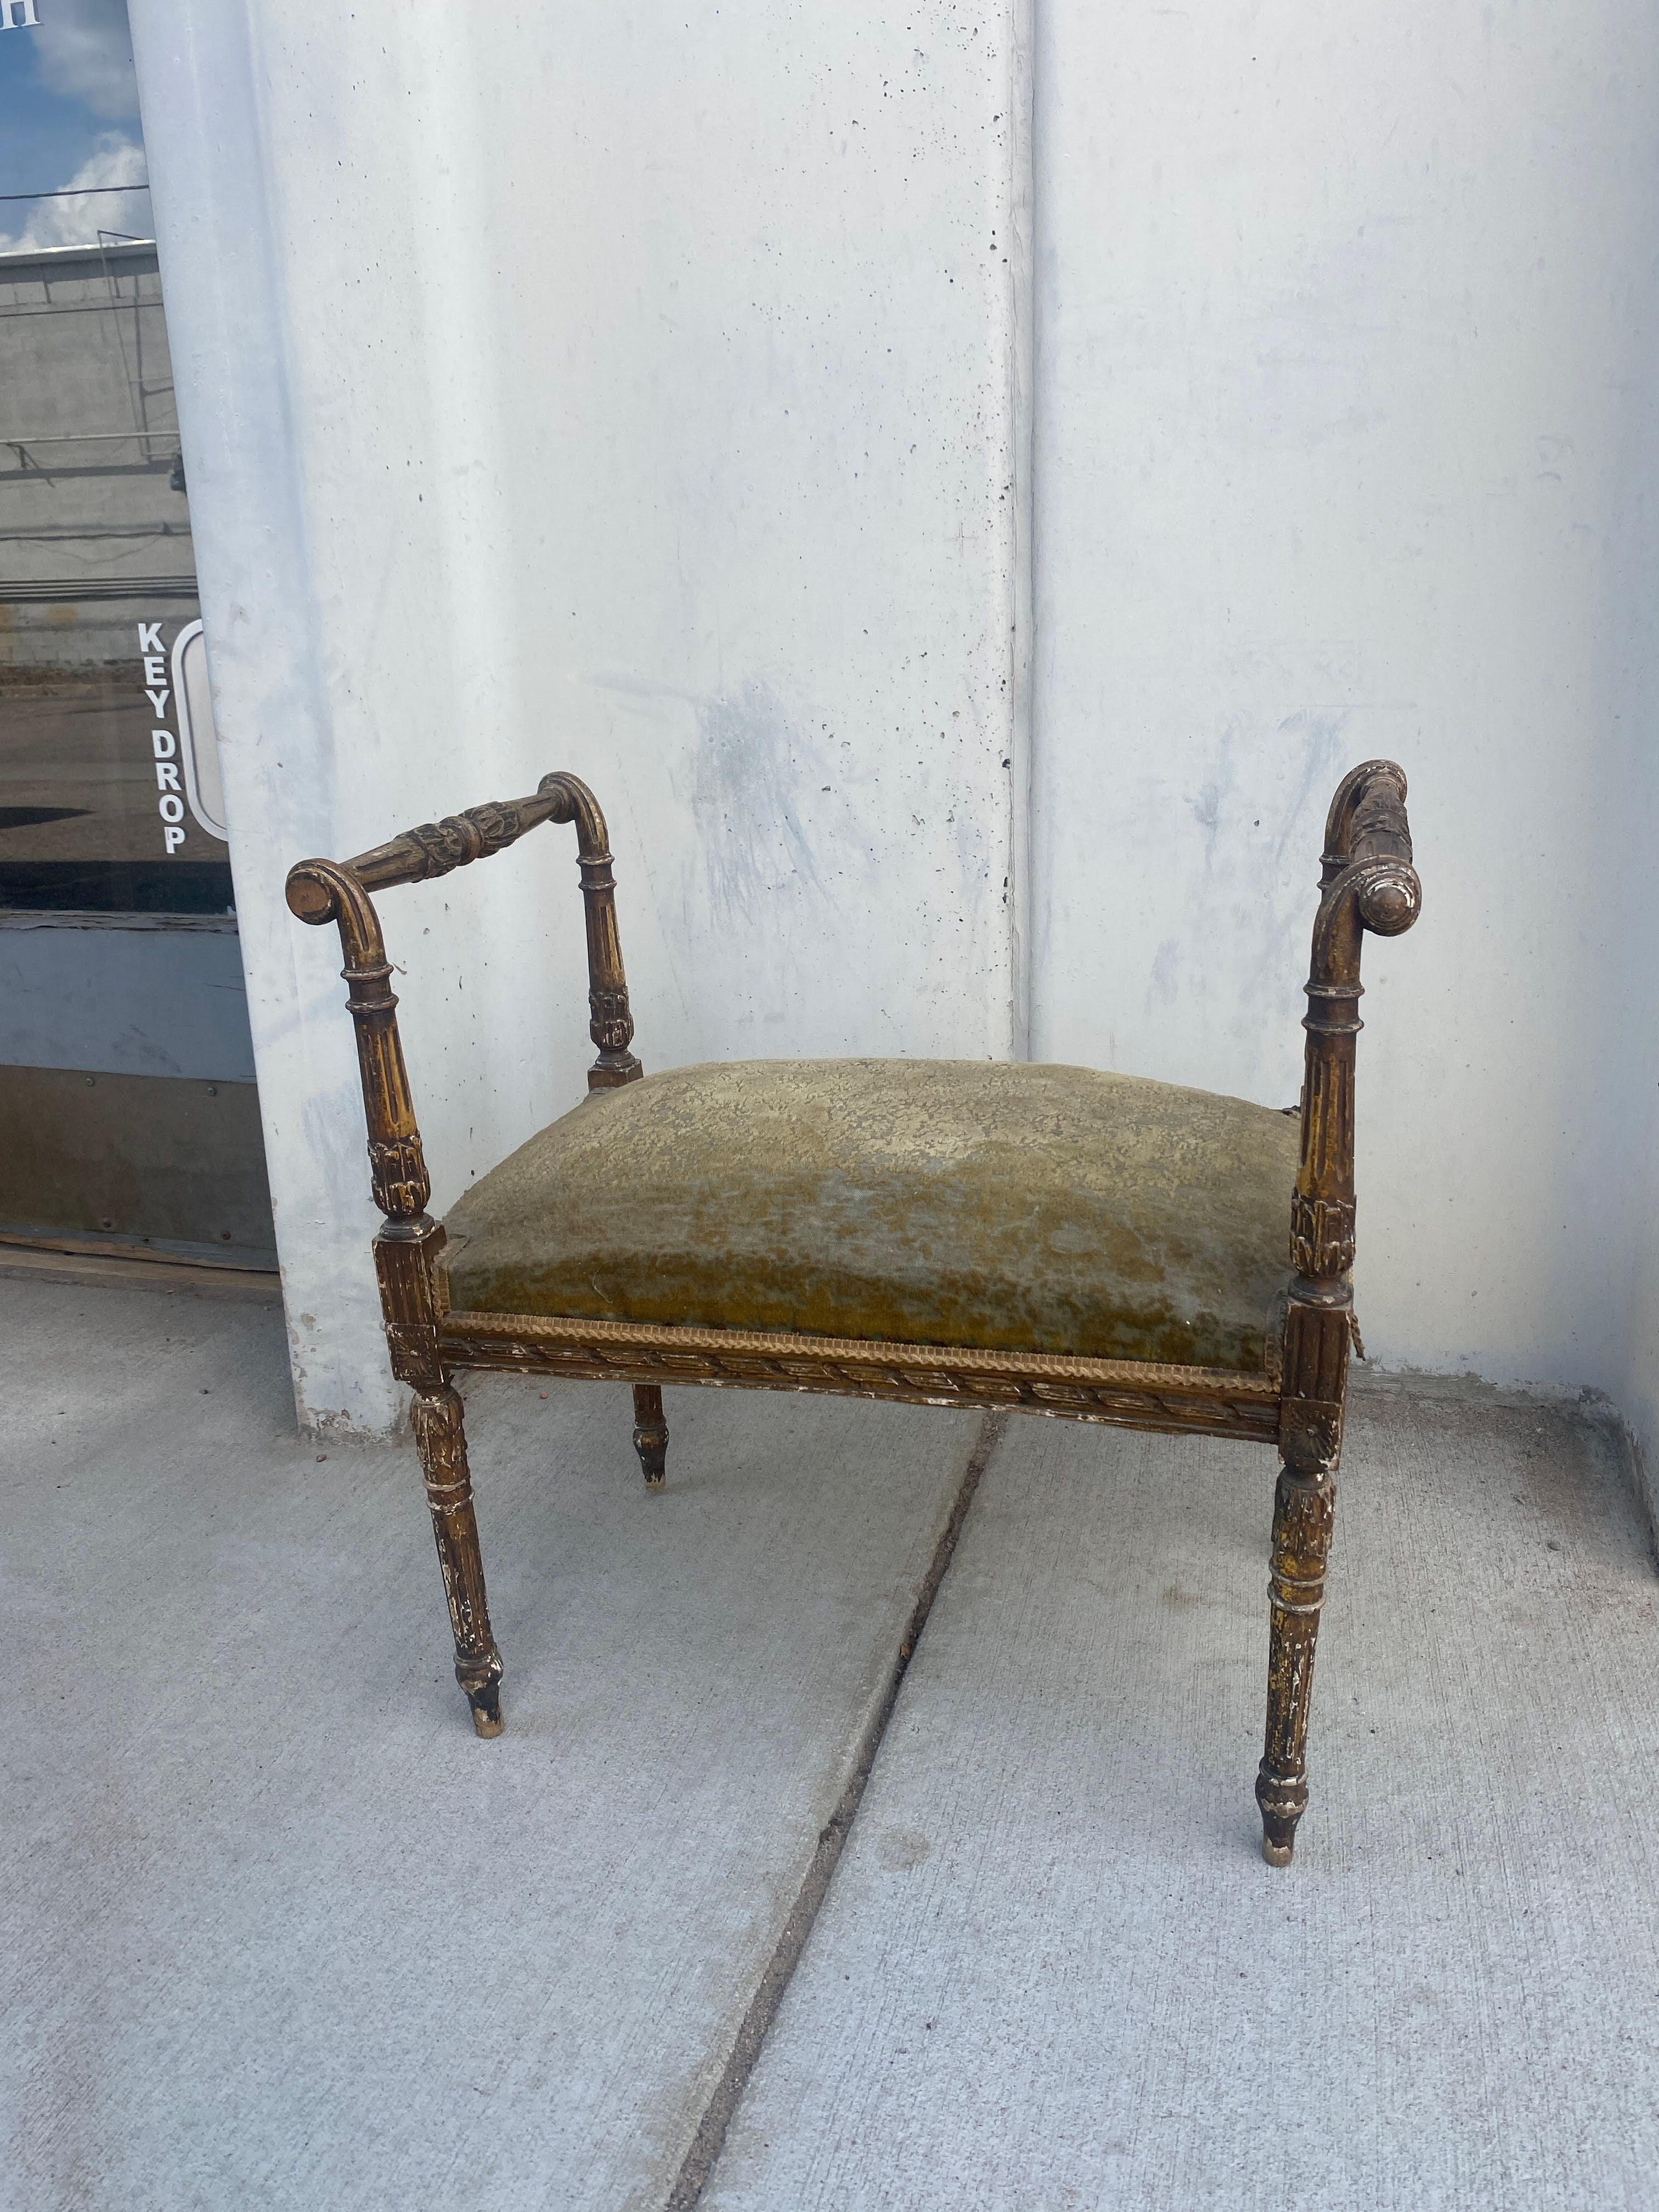 French Louis XVI style benches, late 19th/ early 20th c. Wood frame in a distressed finish, scrolled acanthus leaf carved arms, green mohair upholstered seat, rising on tapering fluted legs, mohair with significant loss to pile.

Dimensions: approx